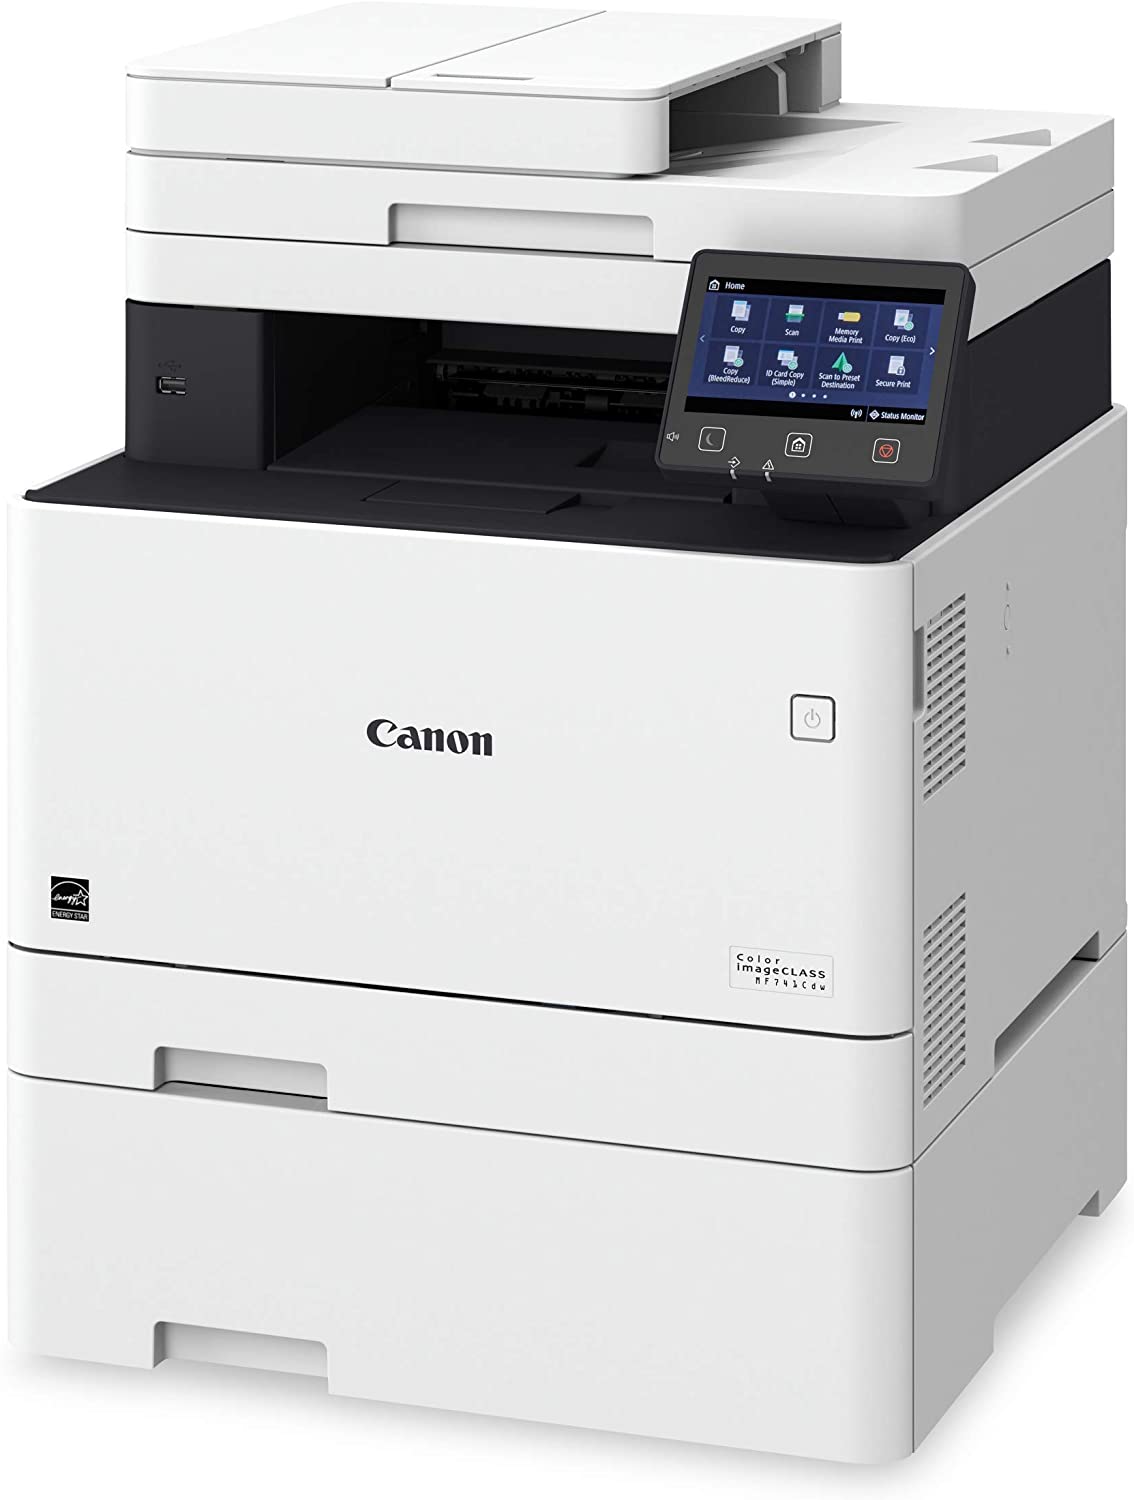 Canon Color imageCLASS MF741Cdw - Multifunction, Wireless, Mobile-Ready, Duplex Laser Printer with 3 Year Warranty